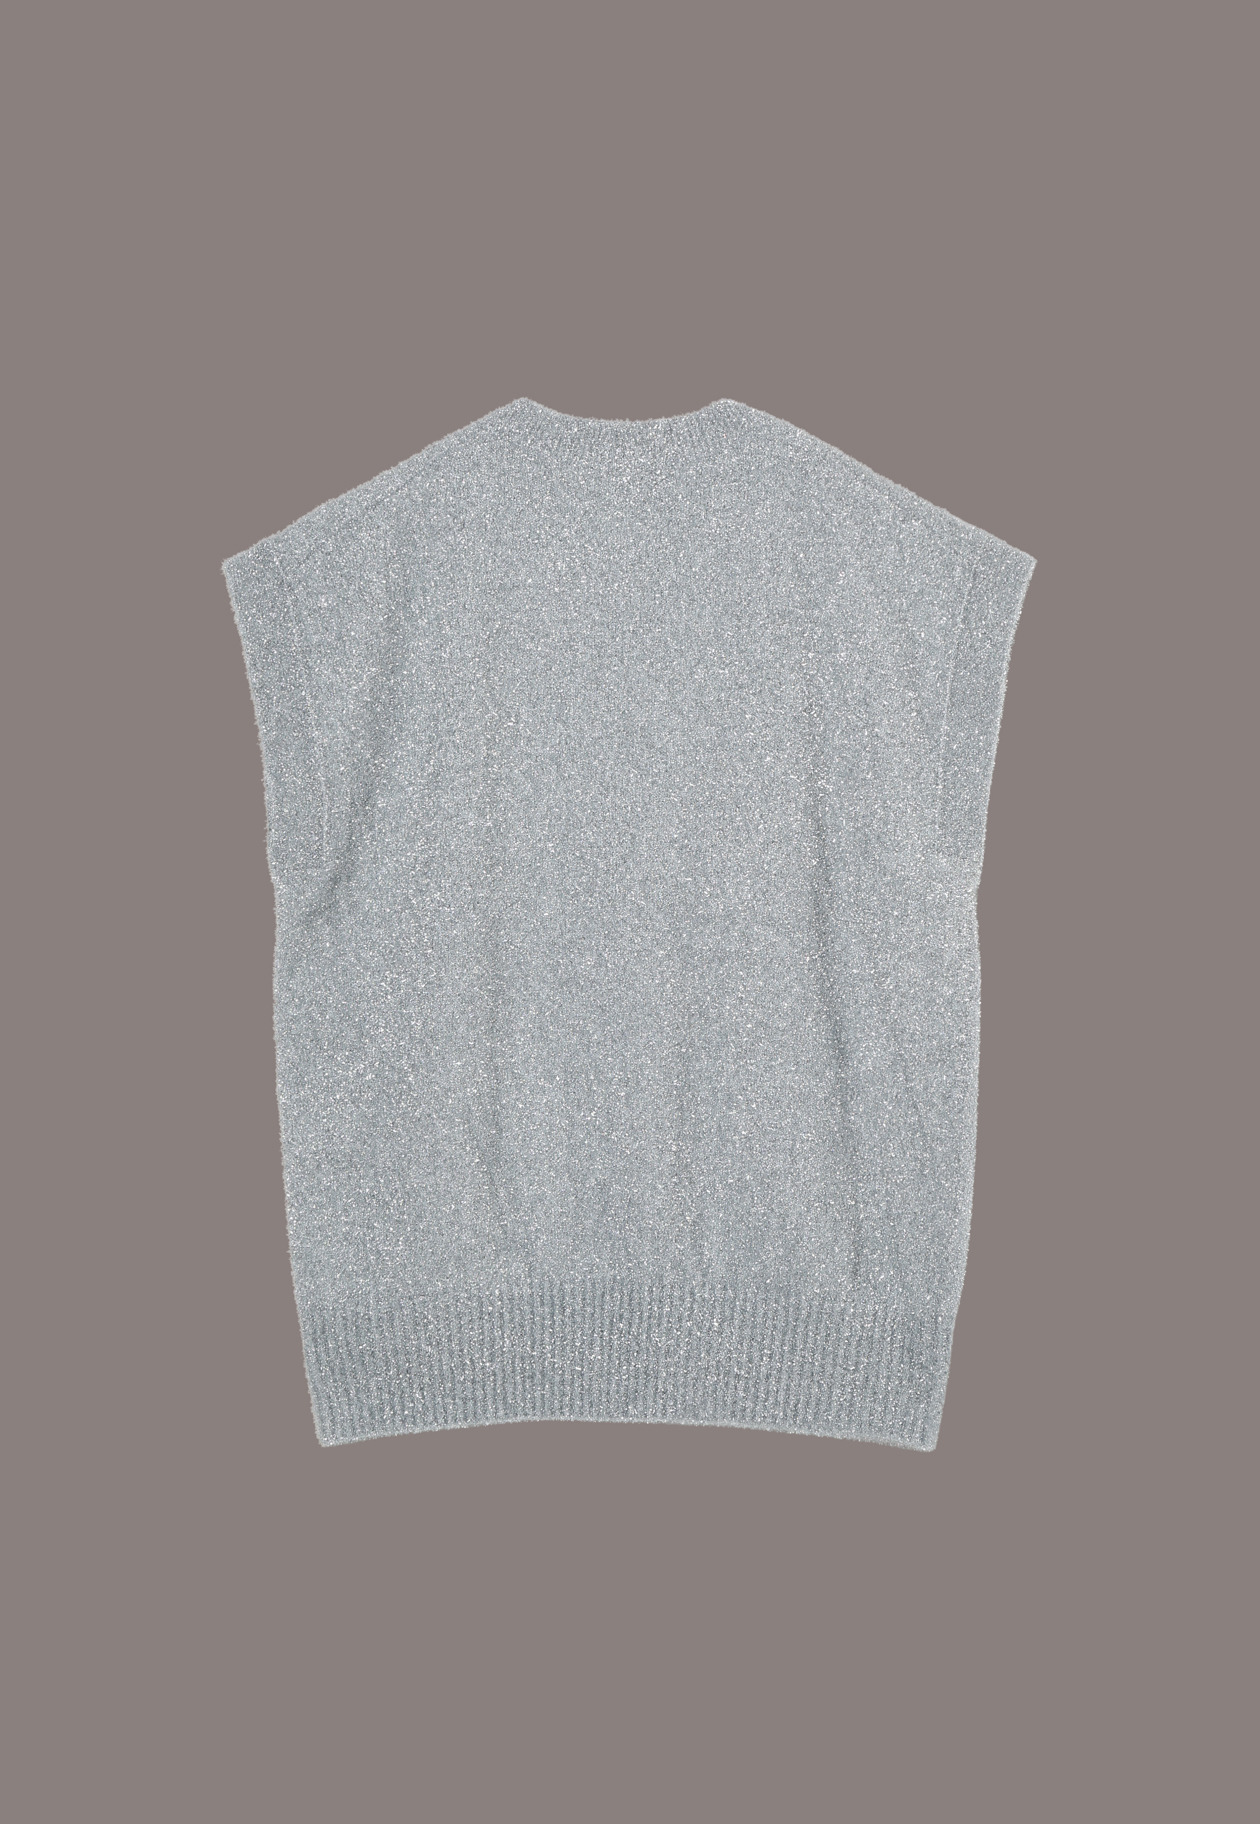 LAME YARN KNIT PULL-OVER 詳細画像 Silver 2